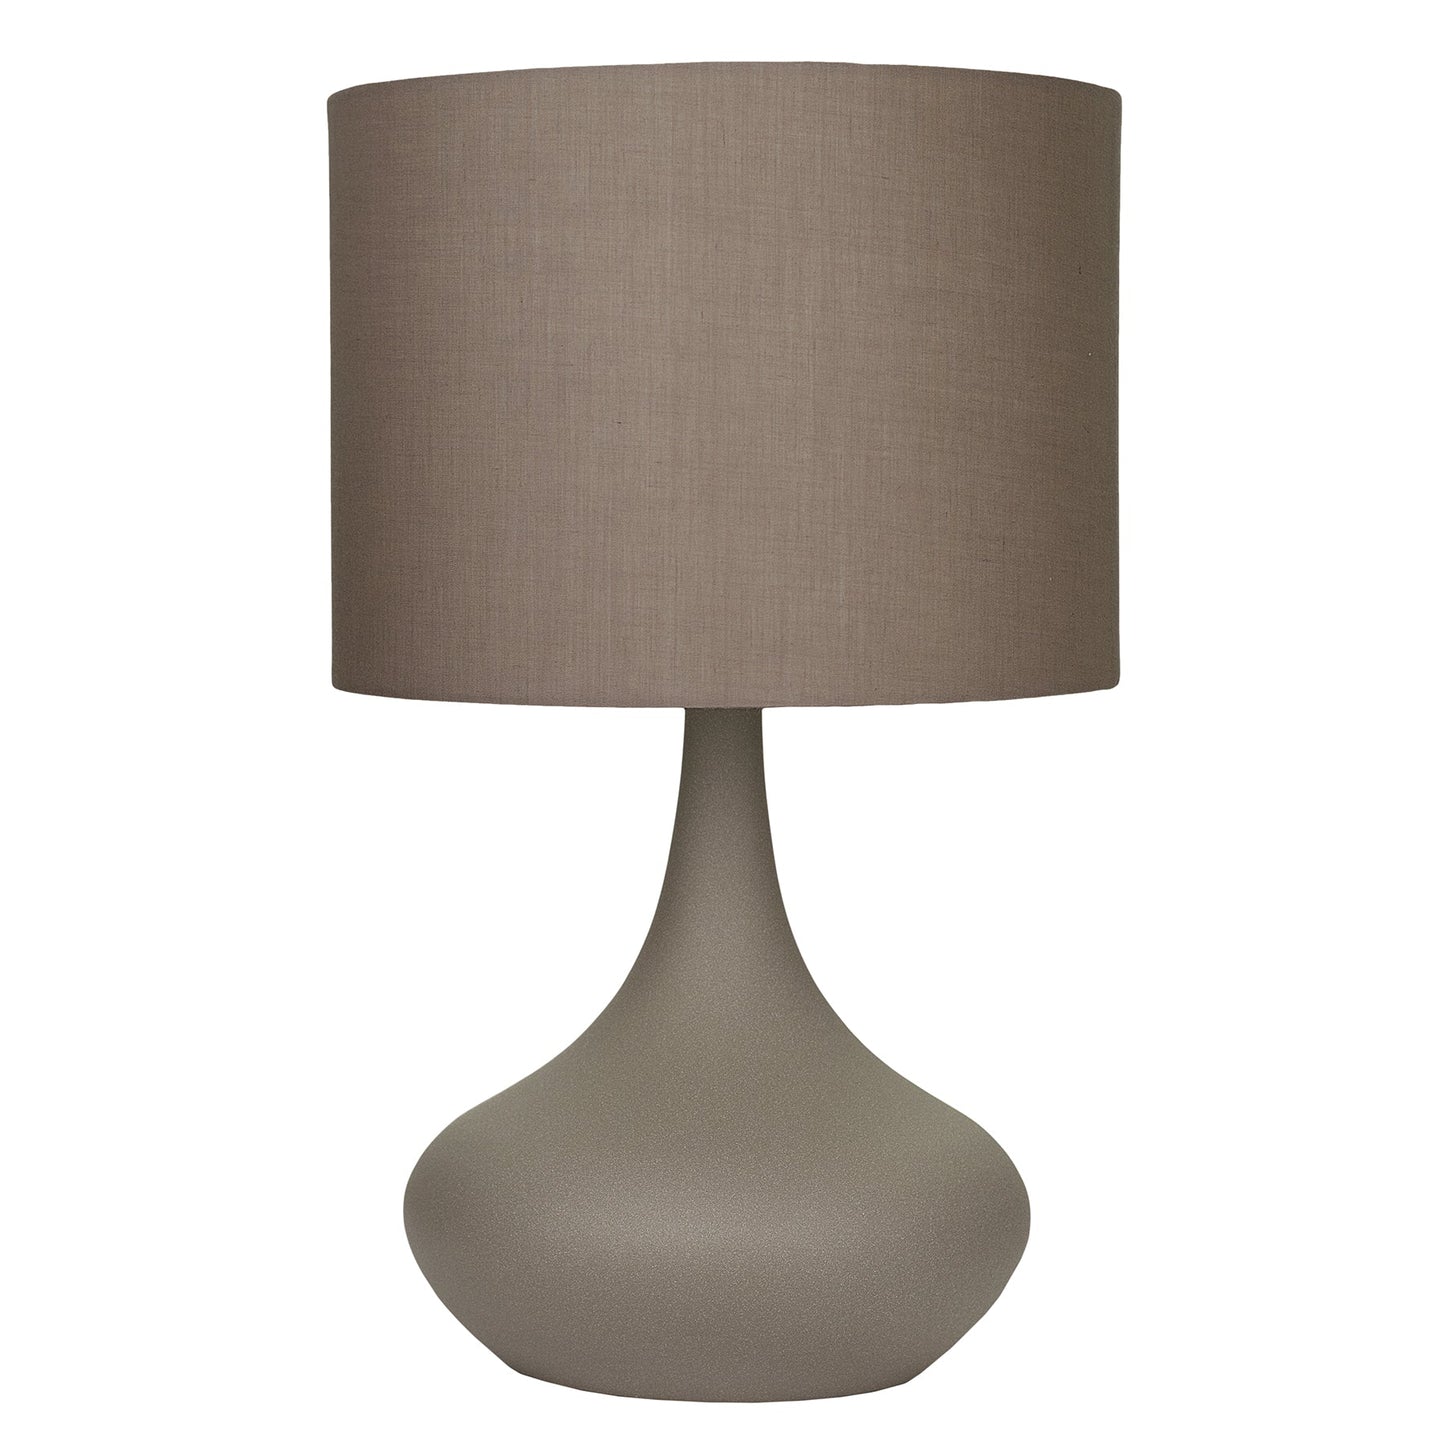 Atley Table Lamp - Large